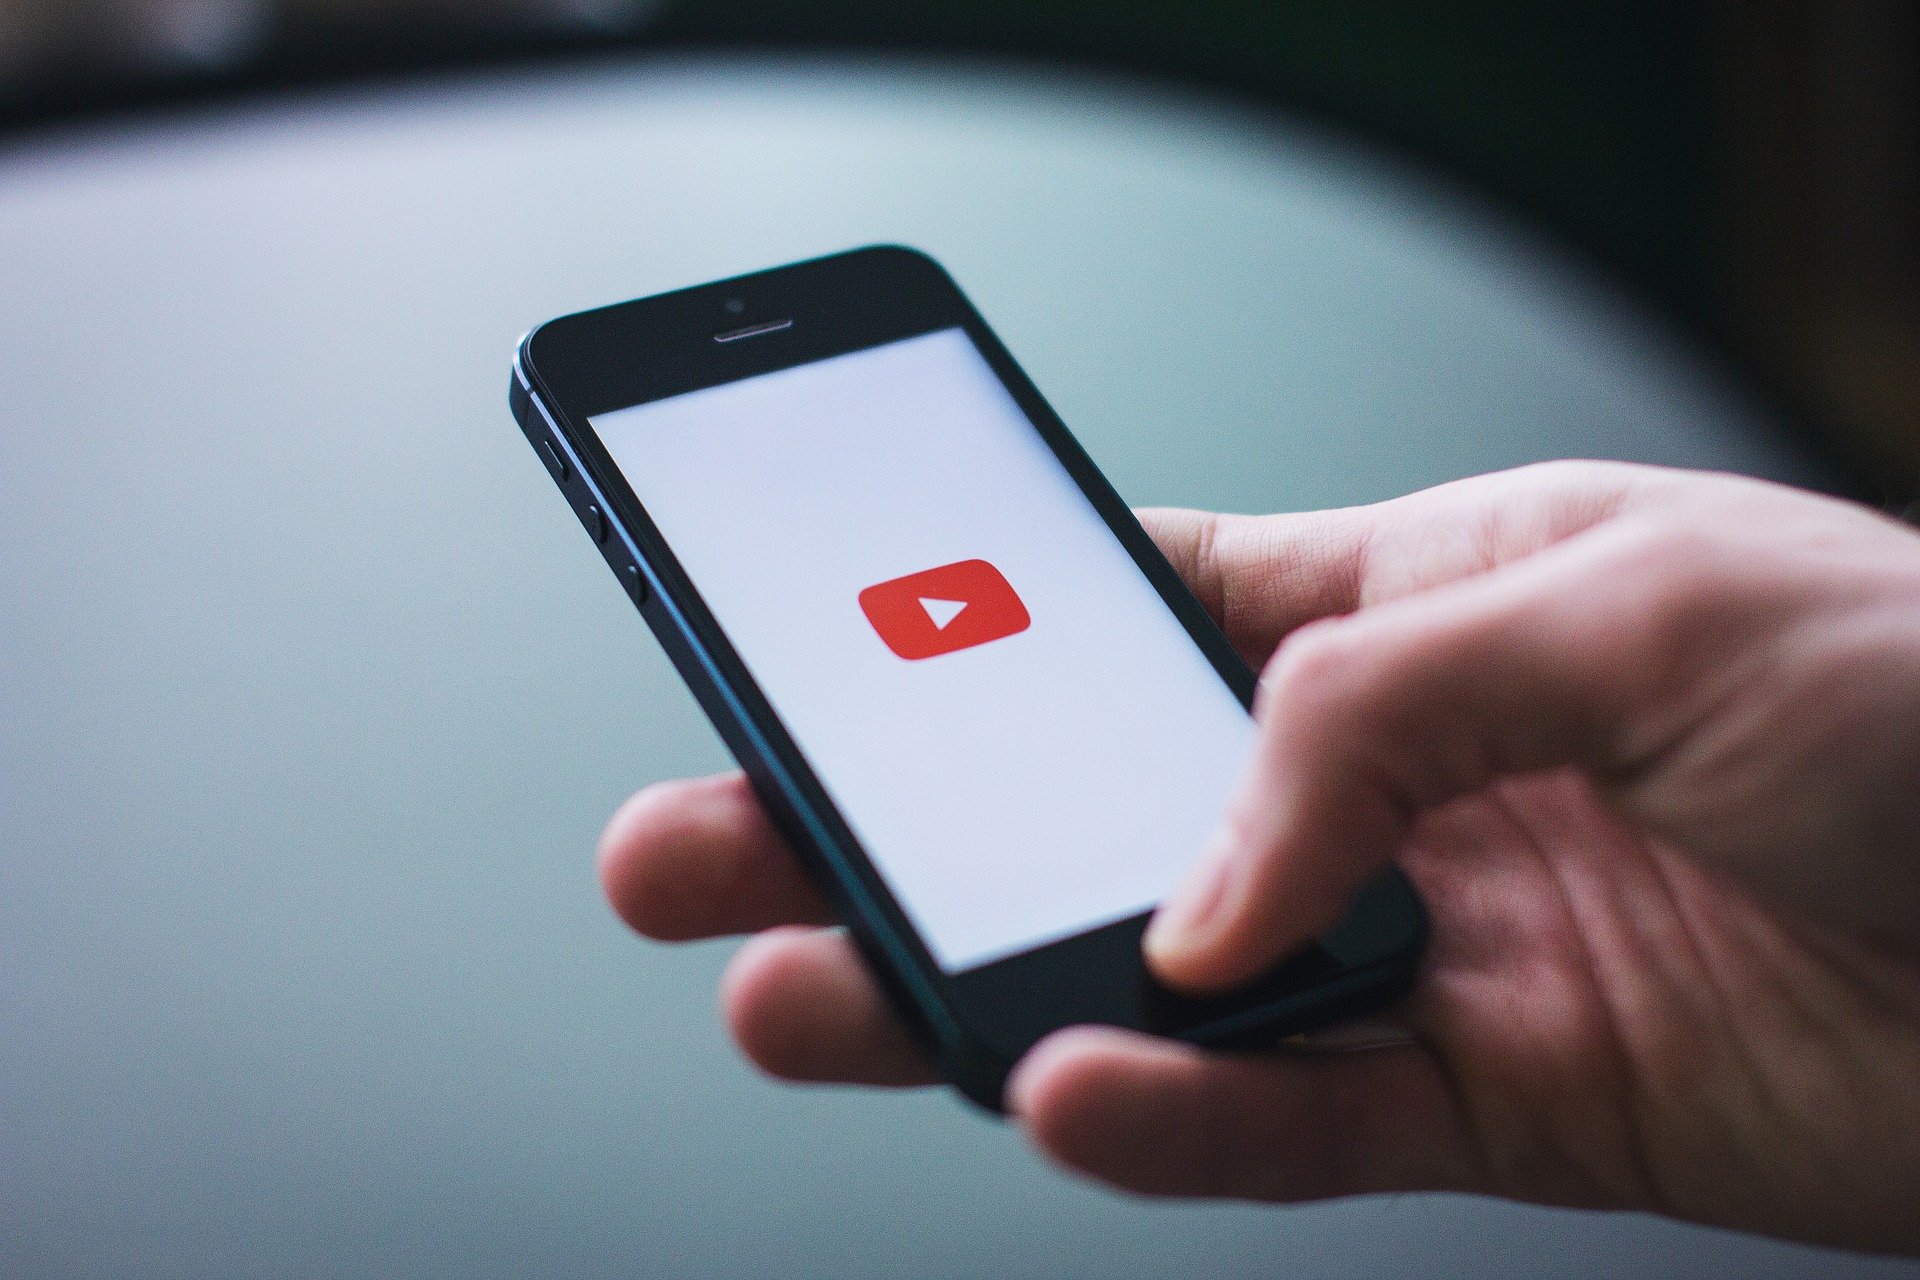 Maximizing on Video: How to Get More Eyes On Your Video Content